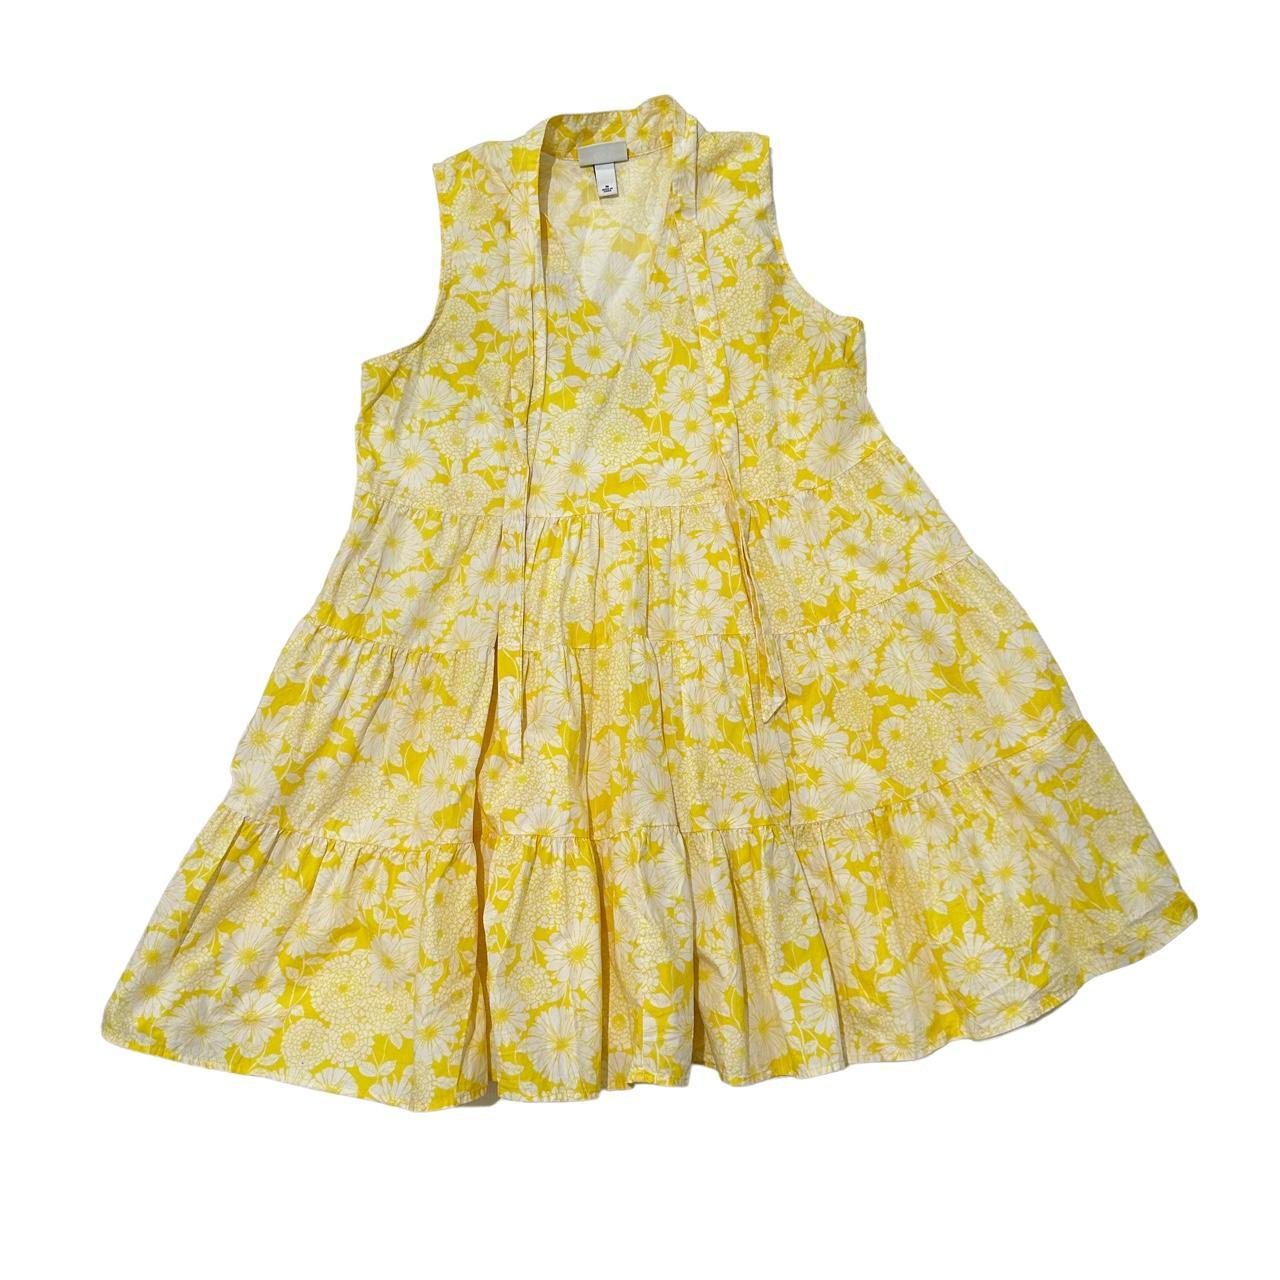 Target | Knox Rose | Floral Tiered Dress | Size M